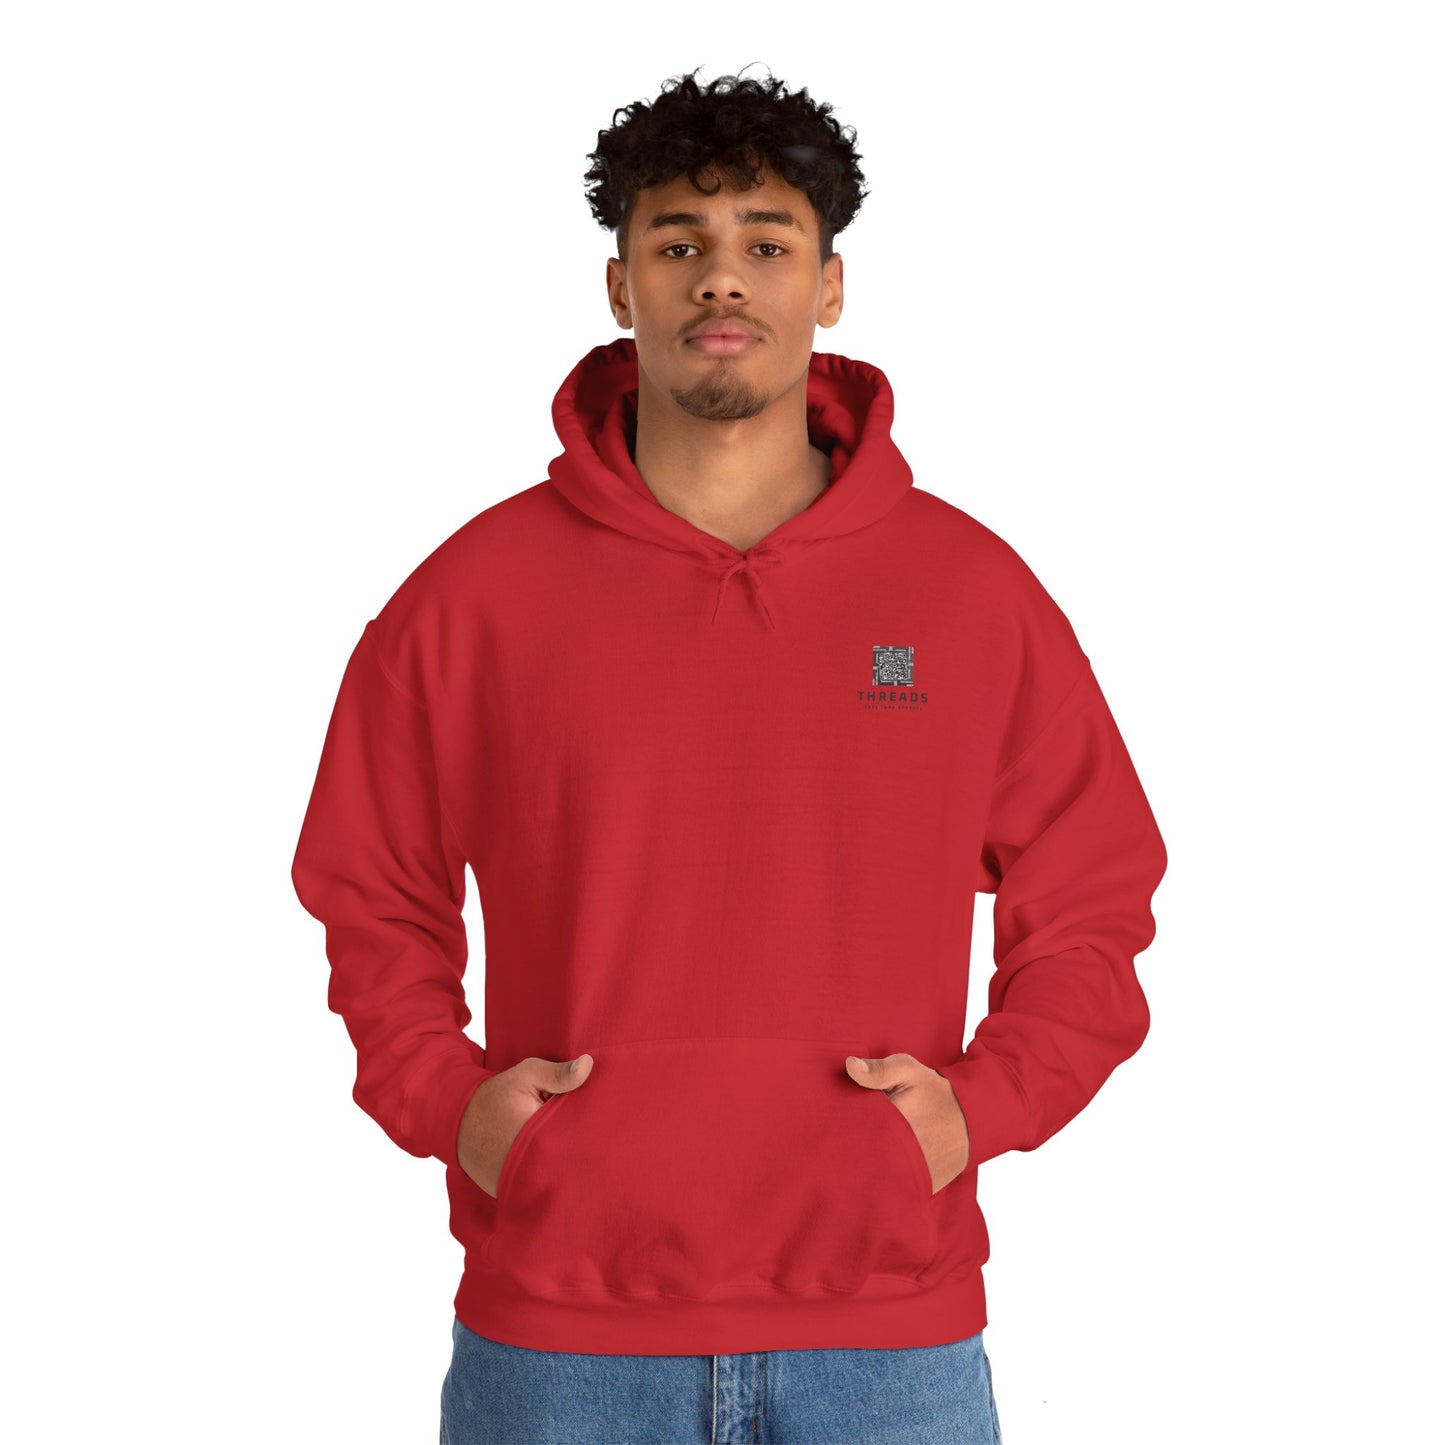 KARMA IS THE GUY ON THE CHIEFS - ERAS TOUR QR CODE HOODIE